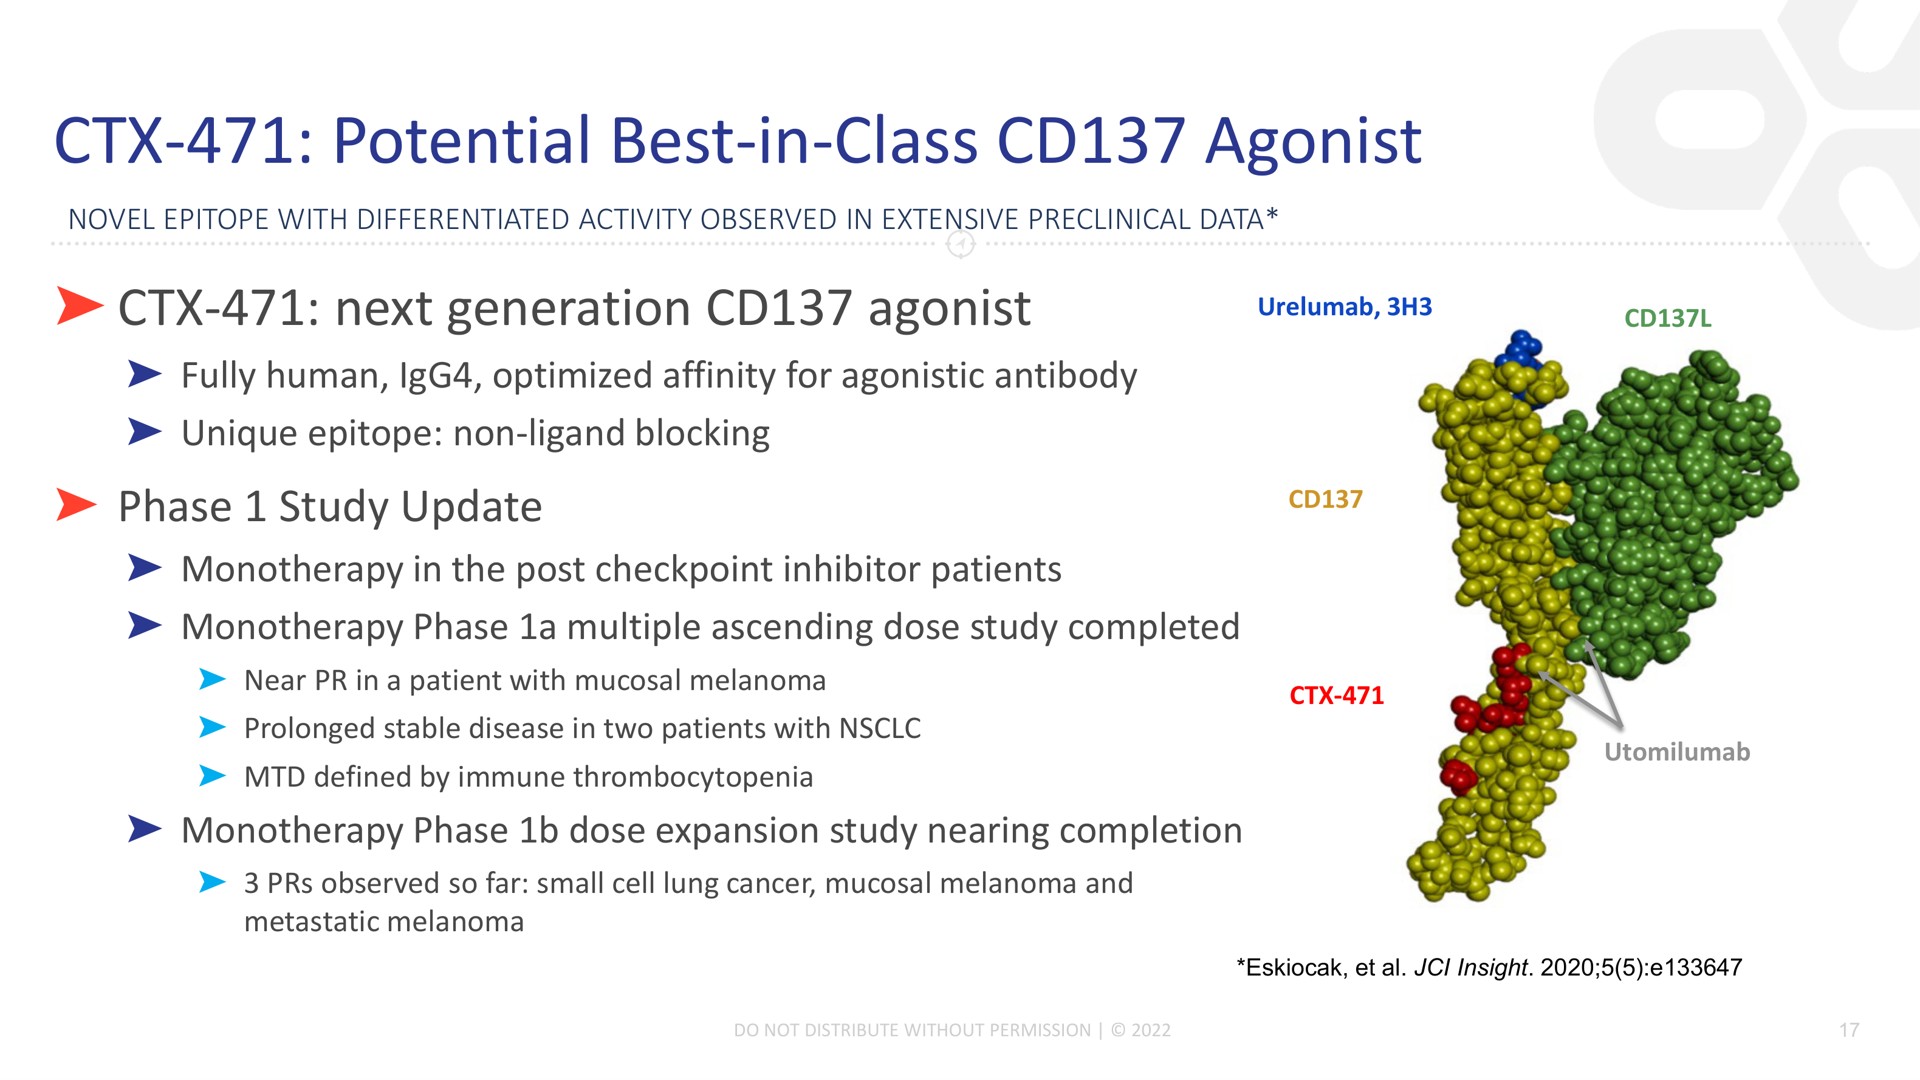 potential best in class agonist | Compass Therapeutics